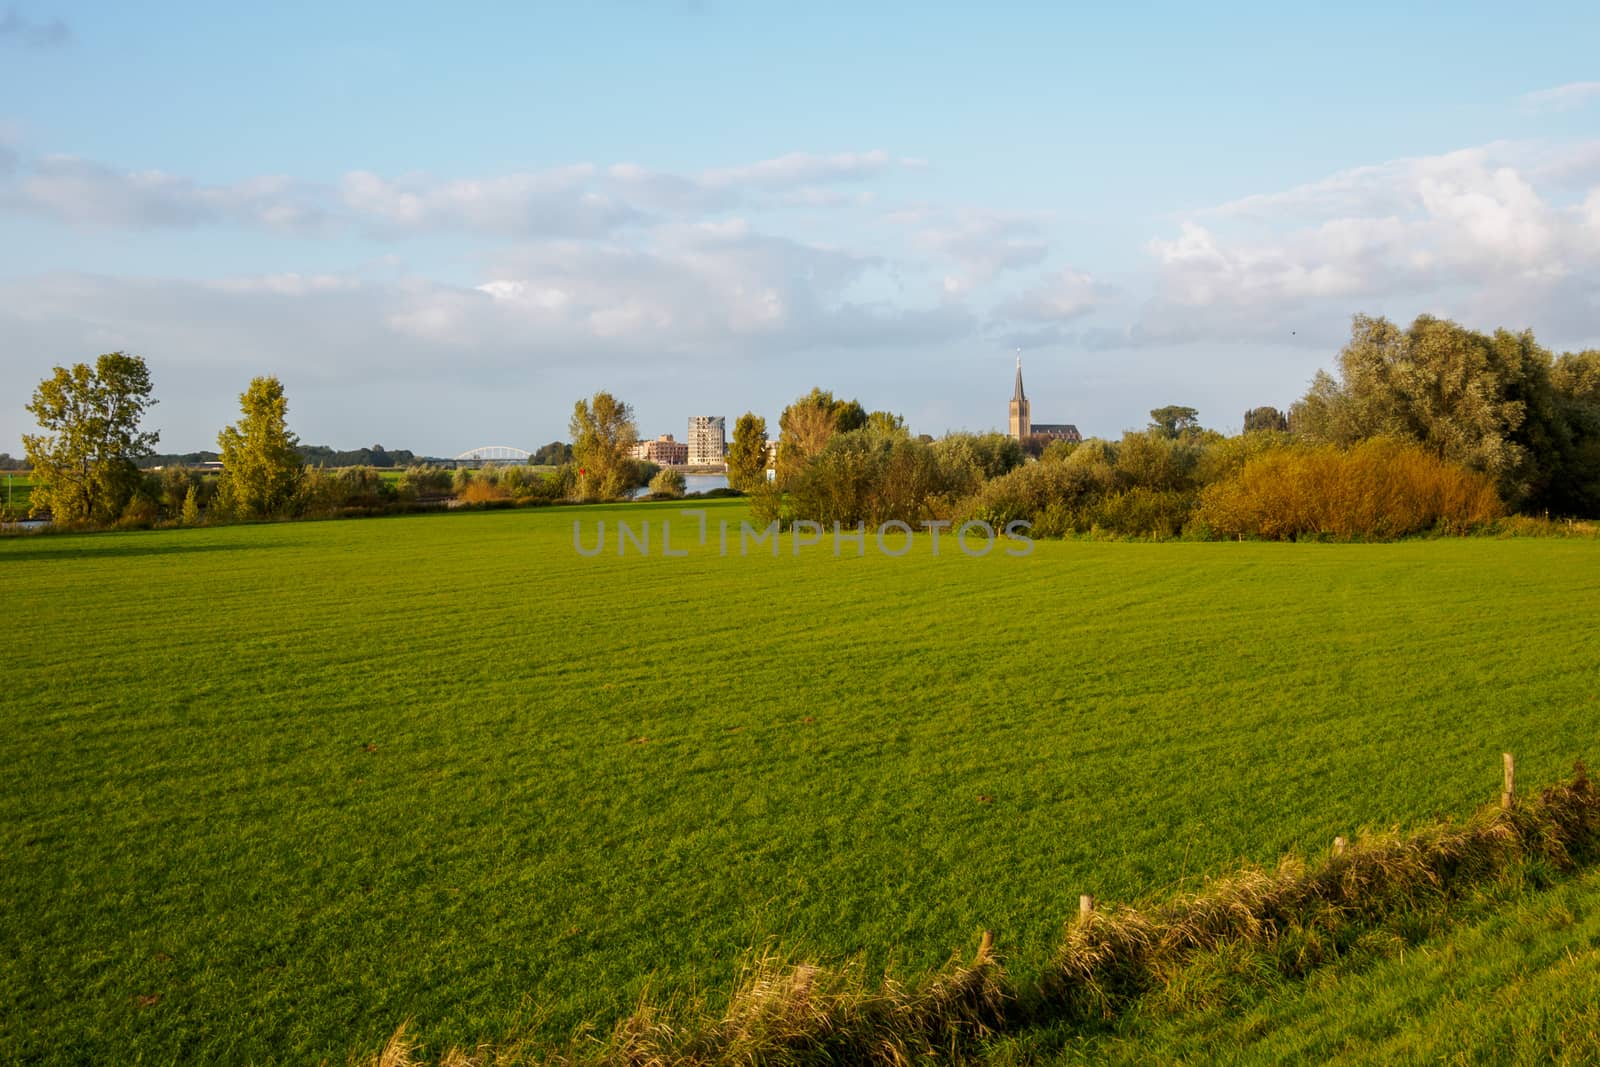 Doesburg in the distance by frankhoekzema